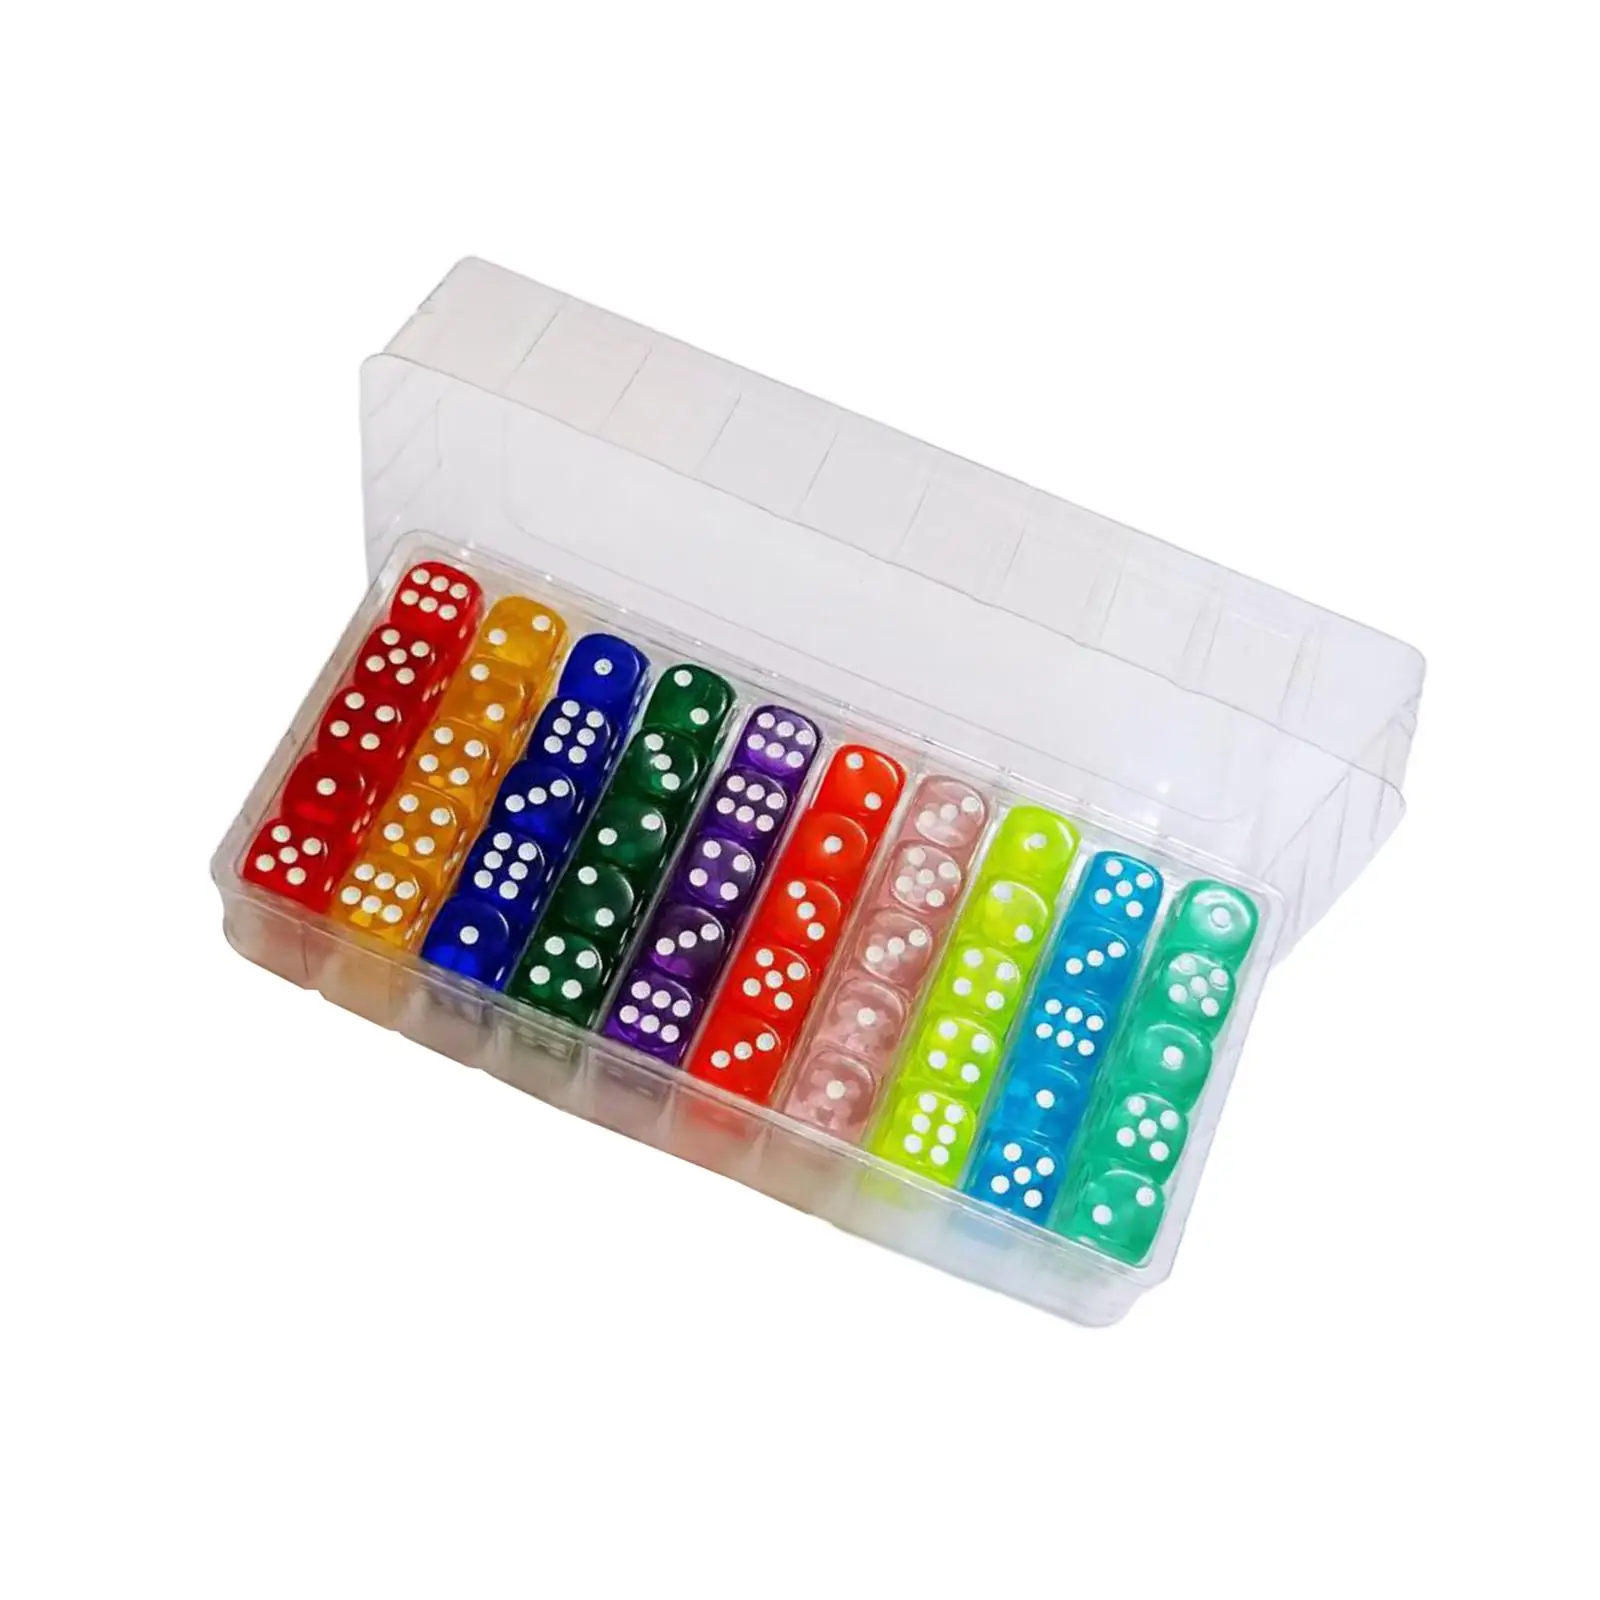 100 Pieces 6 Sided Dice Acrylic Dice 10 Colors for Playing Games Classroom